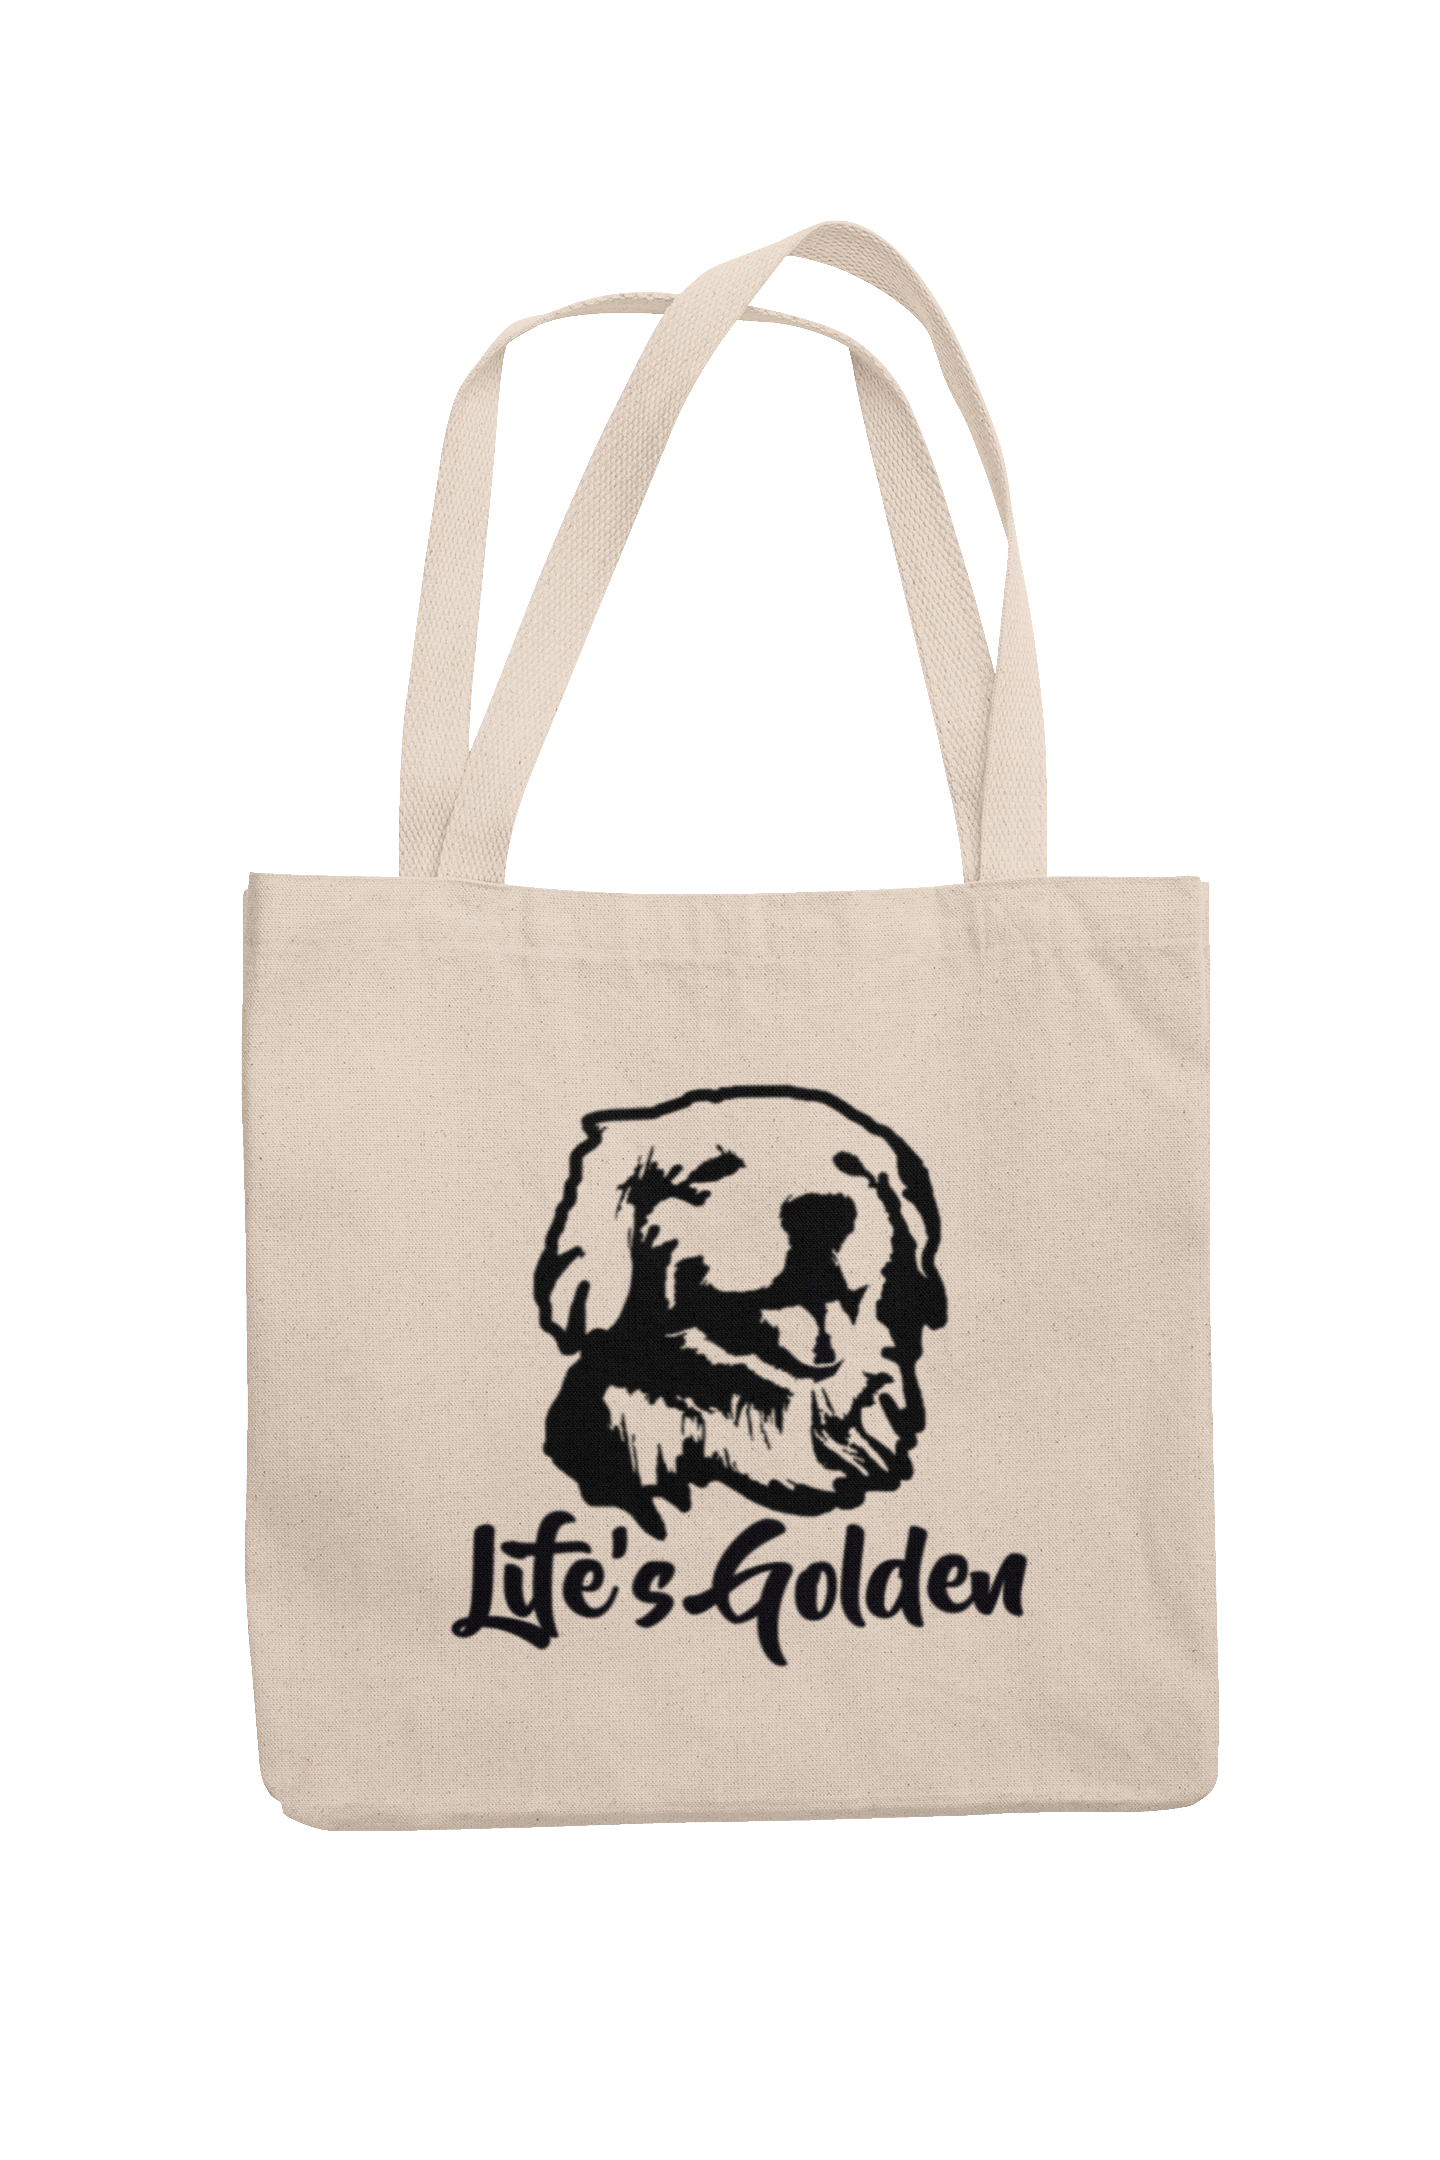 Life's Golden Tote